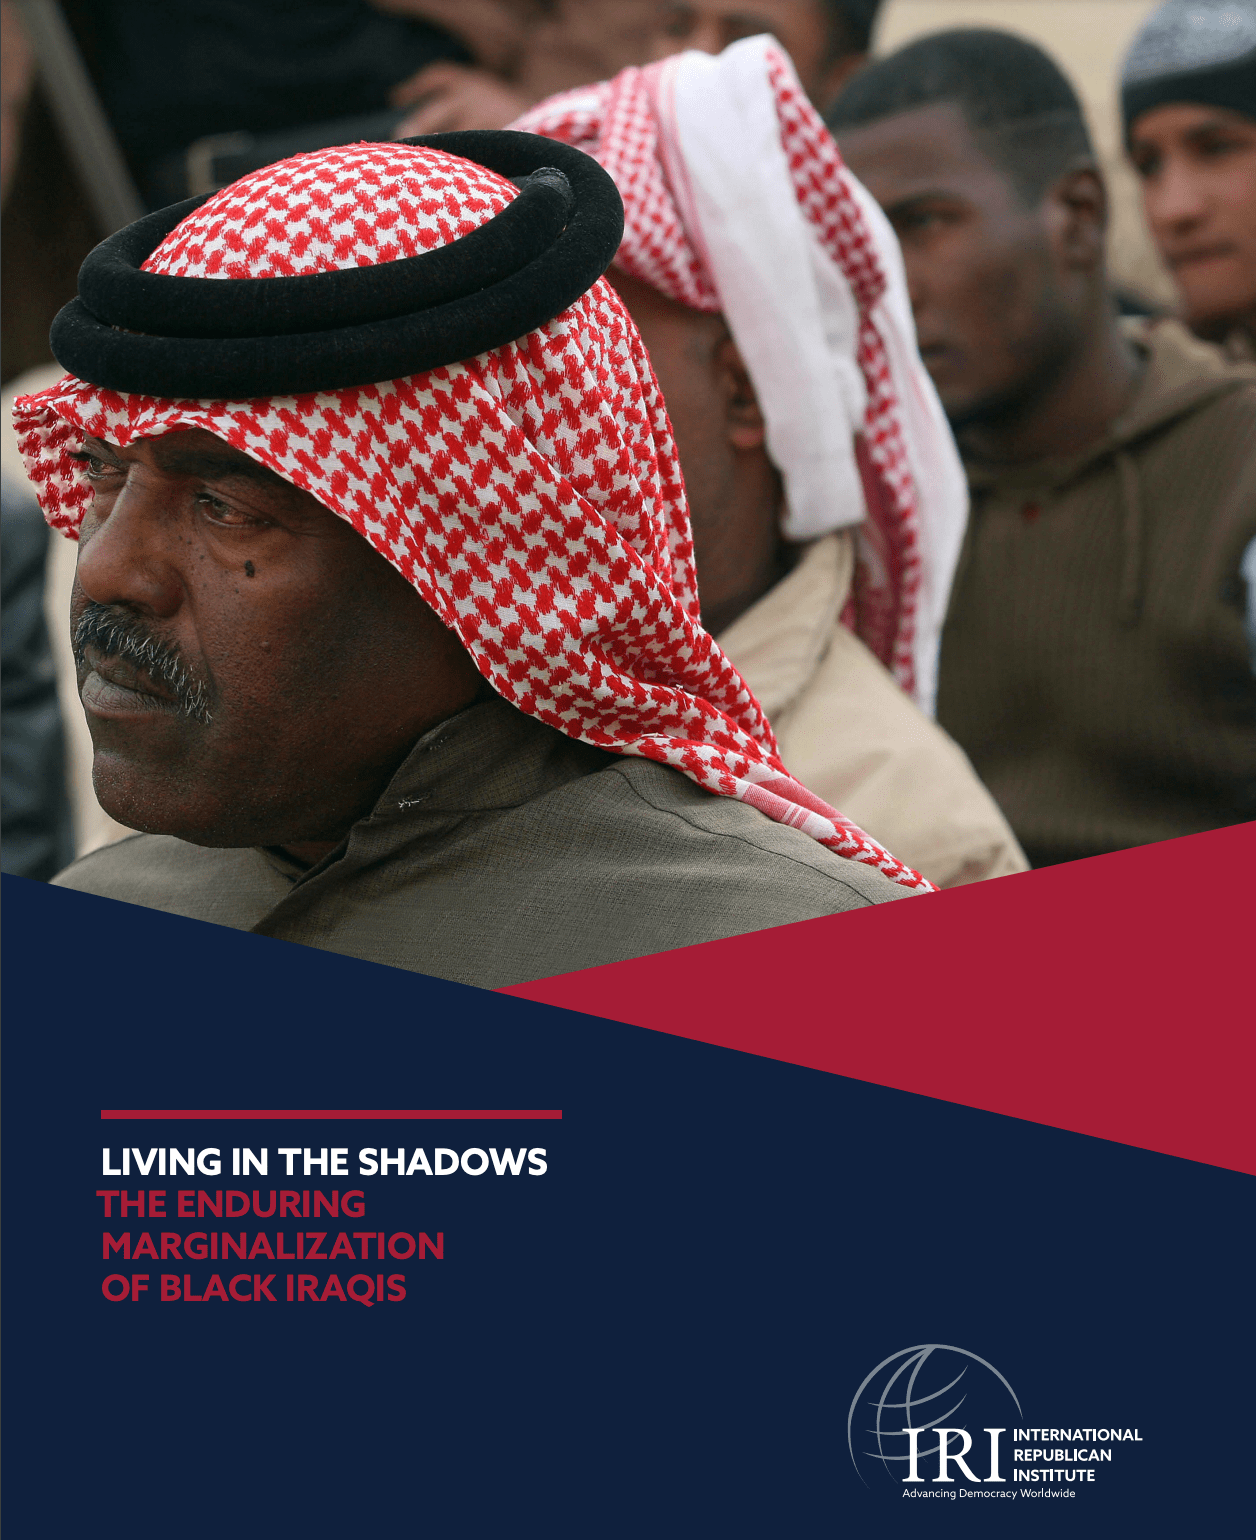 LIVING IN THE SHADOWS: THE ENDURING MARGINALIZATION OF BLACK IRAQIS